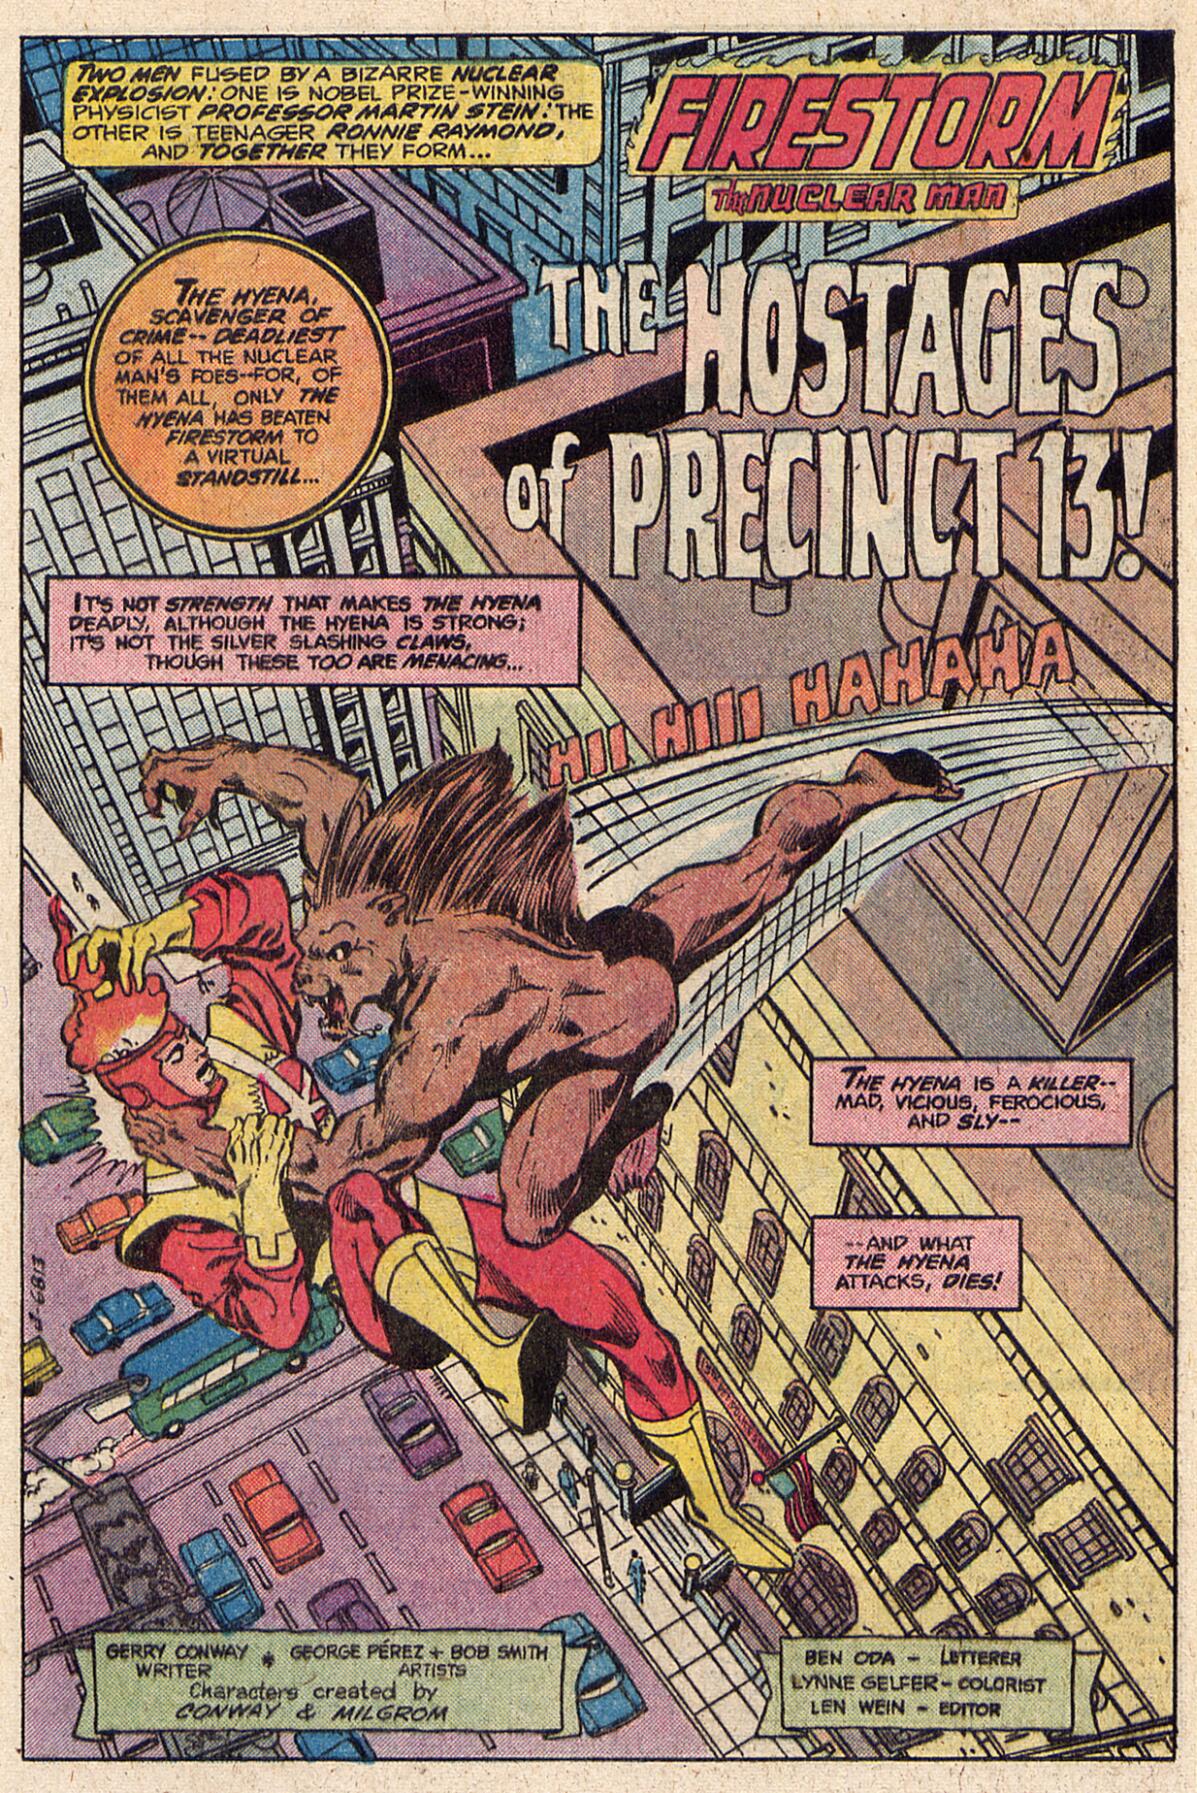 Firestorm in The Flash by Gerry Conway and George Perez